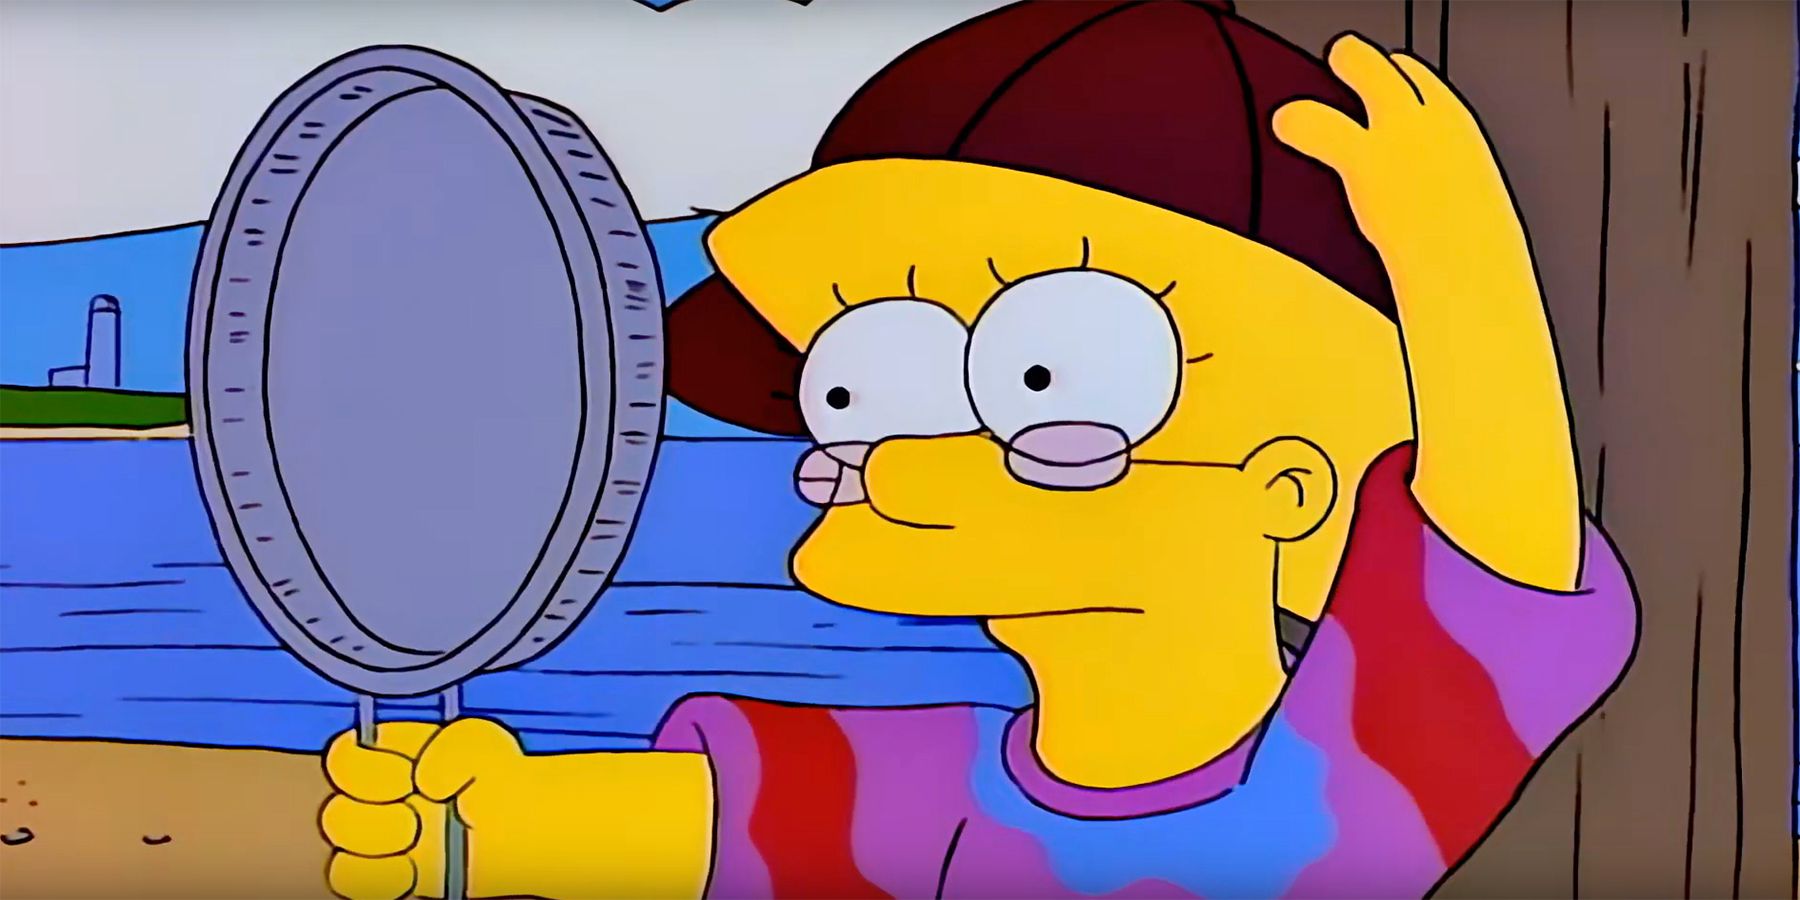 Lisa looking in a mirror in the Simpsons episode Summer of 4ft2